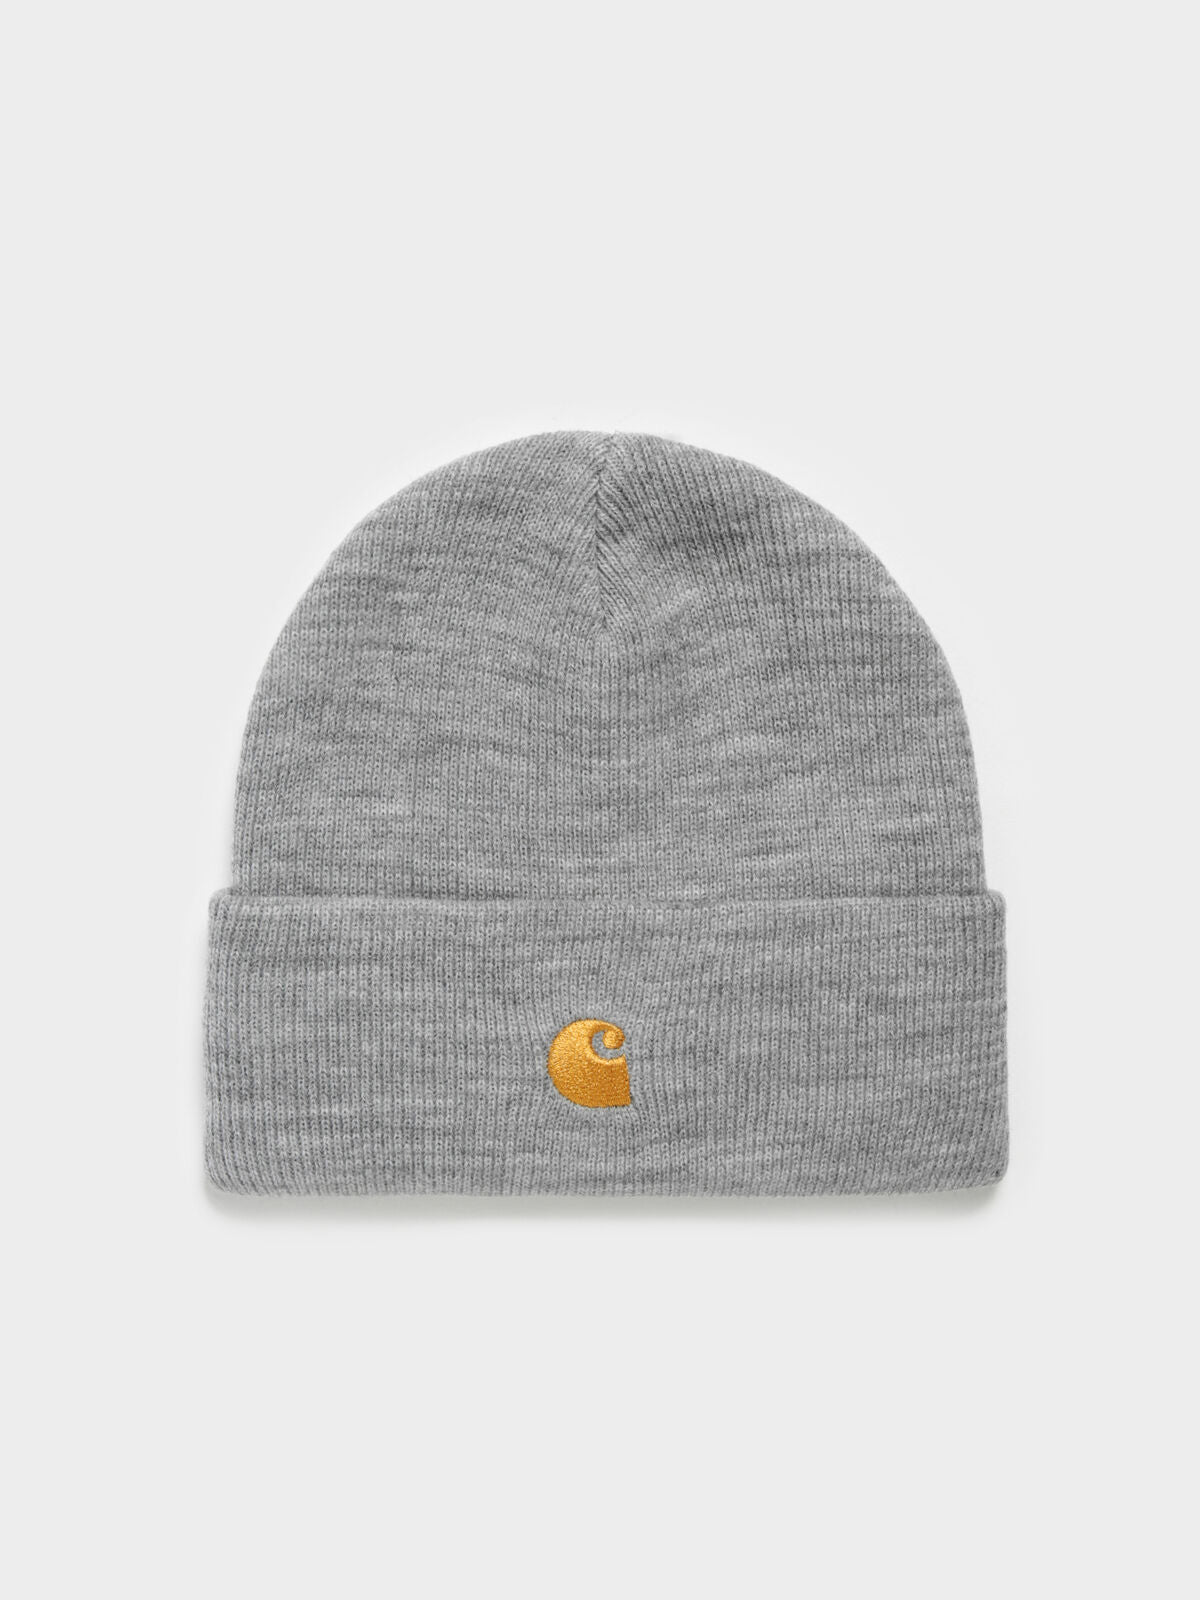 Chase Beanie in Grey &amp; Gold